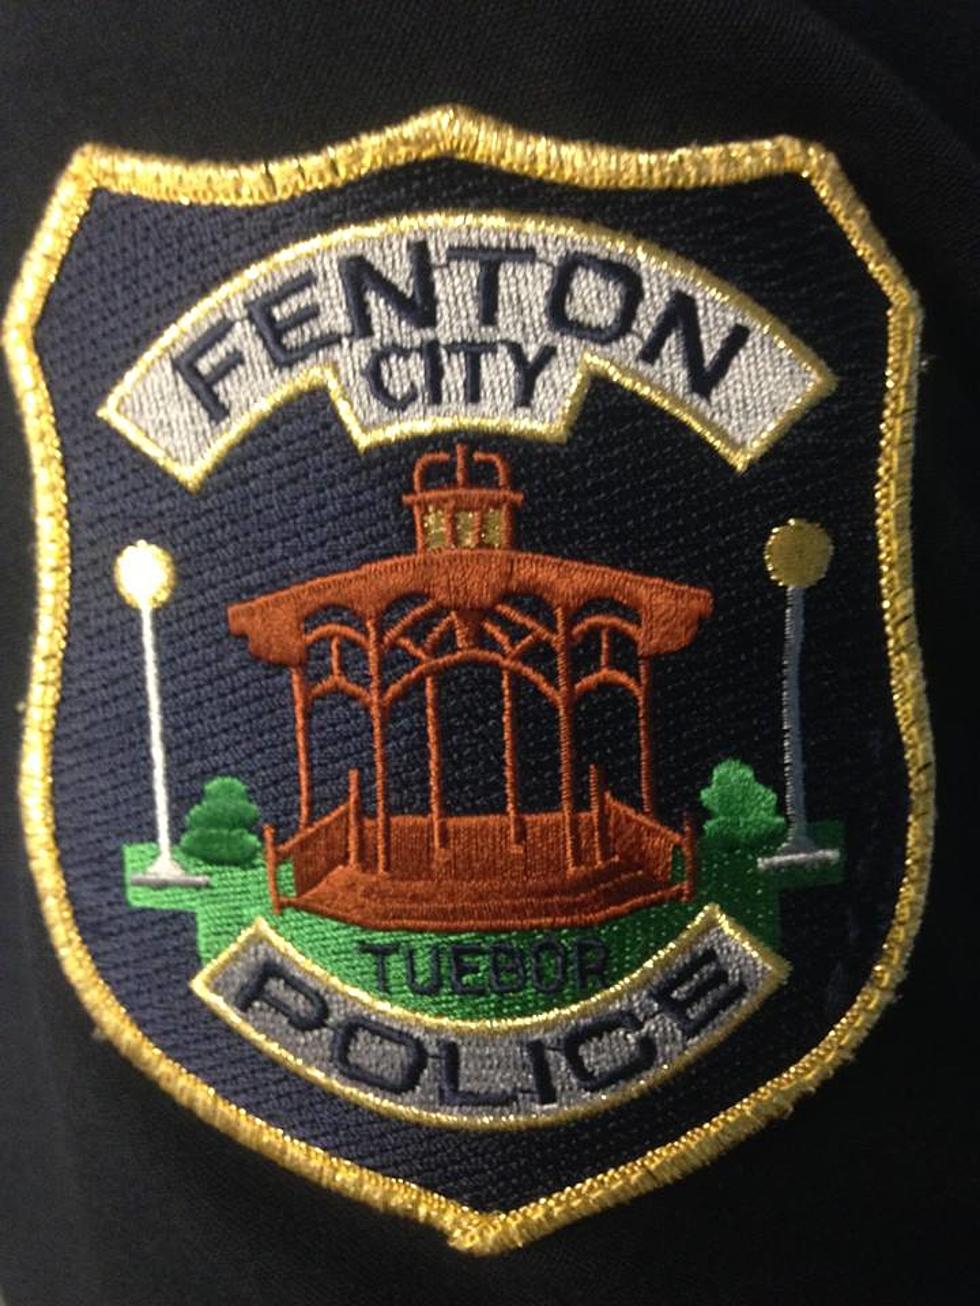 Fenton Police Department Offers Safe Haven for Online Selling